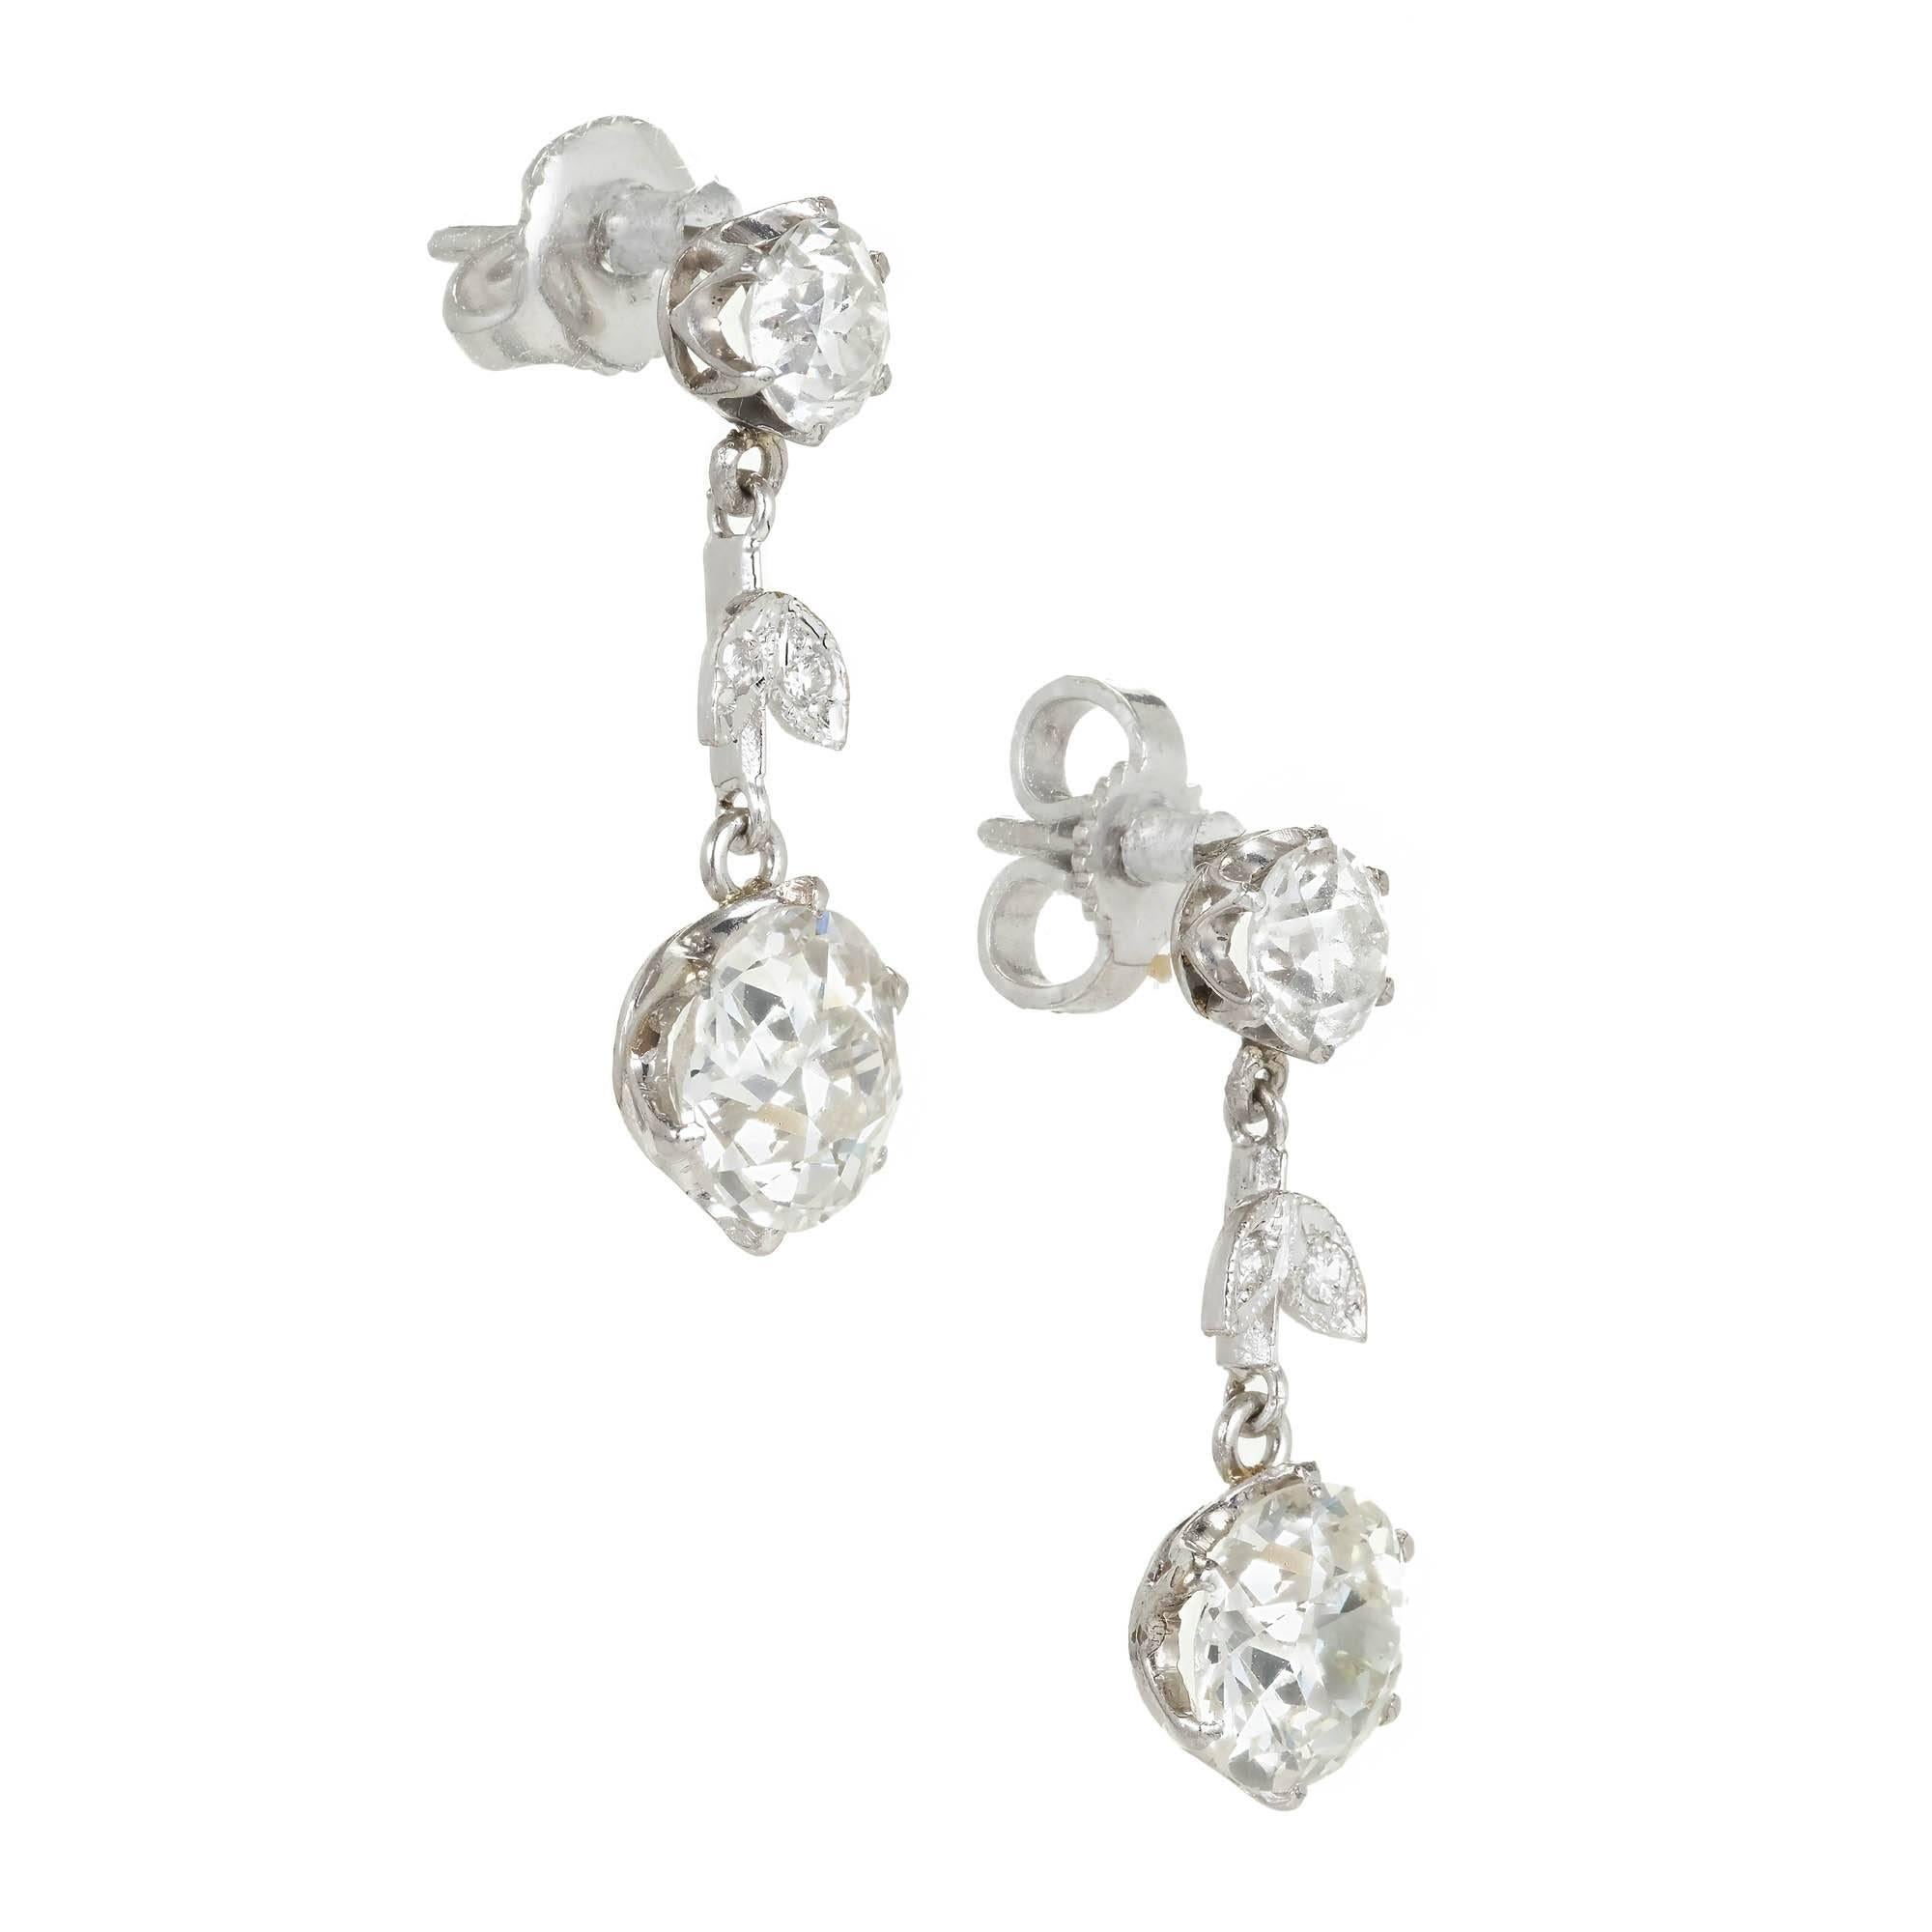 Turn of the century original handmade circa 1900-1910 bright sparkly Old European cut diamond dangle earrings. Delicate Edwardian Deco design with Victorian influence.  Very bright cut. EGL Certified.

2  EGL certified Old European cut Diamonds